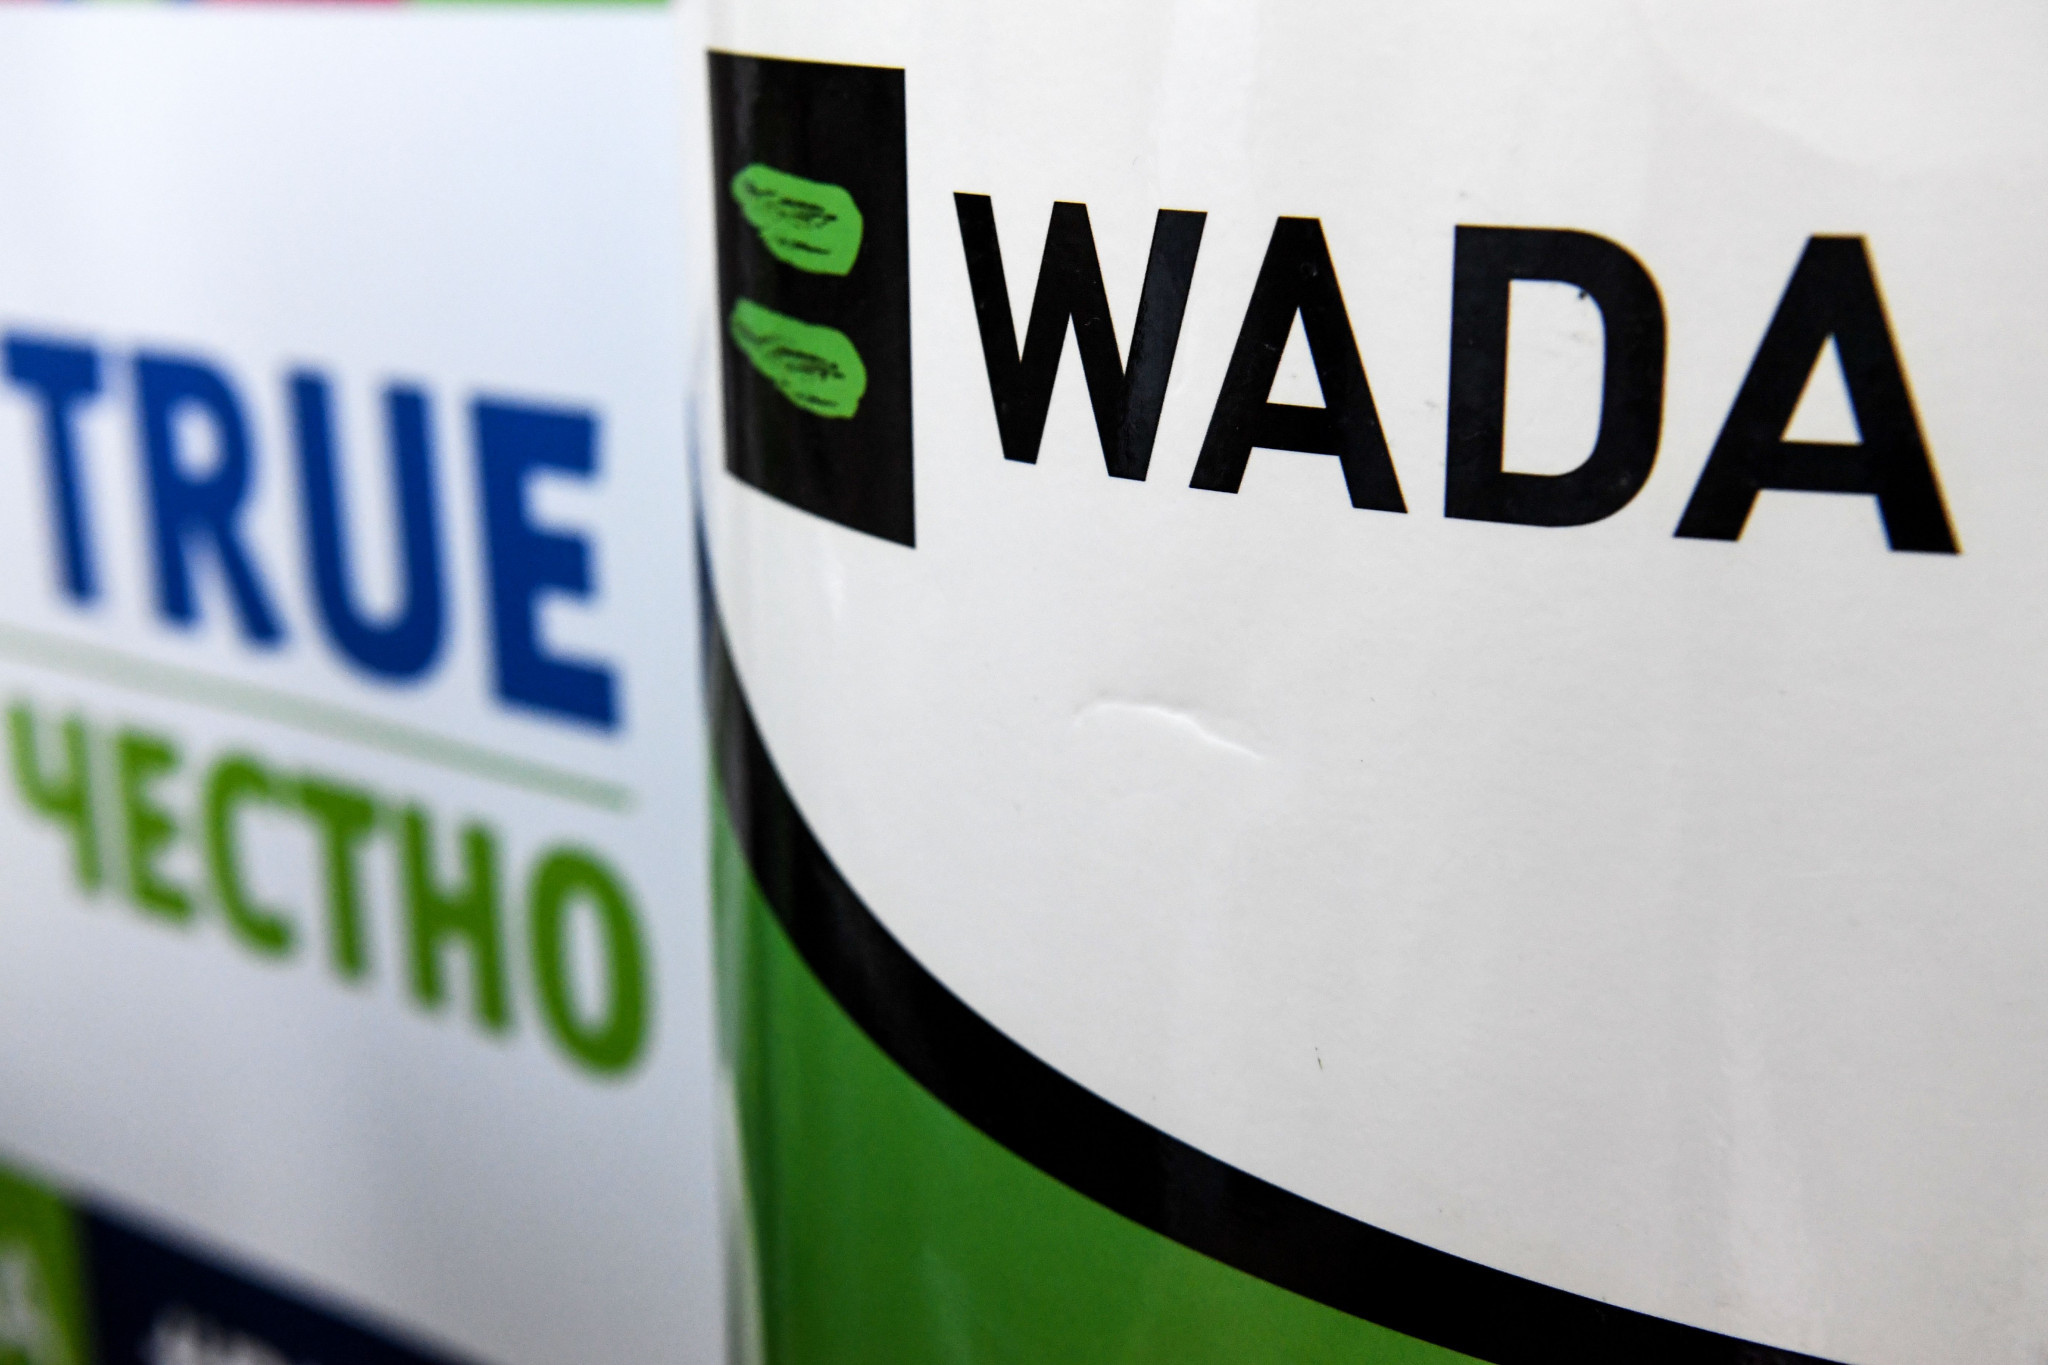 WADA has said it will monitor developments at RUSADA amid concerns over the body's independence ©Getty Images